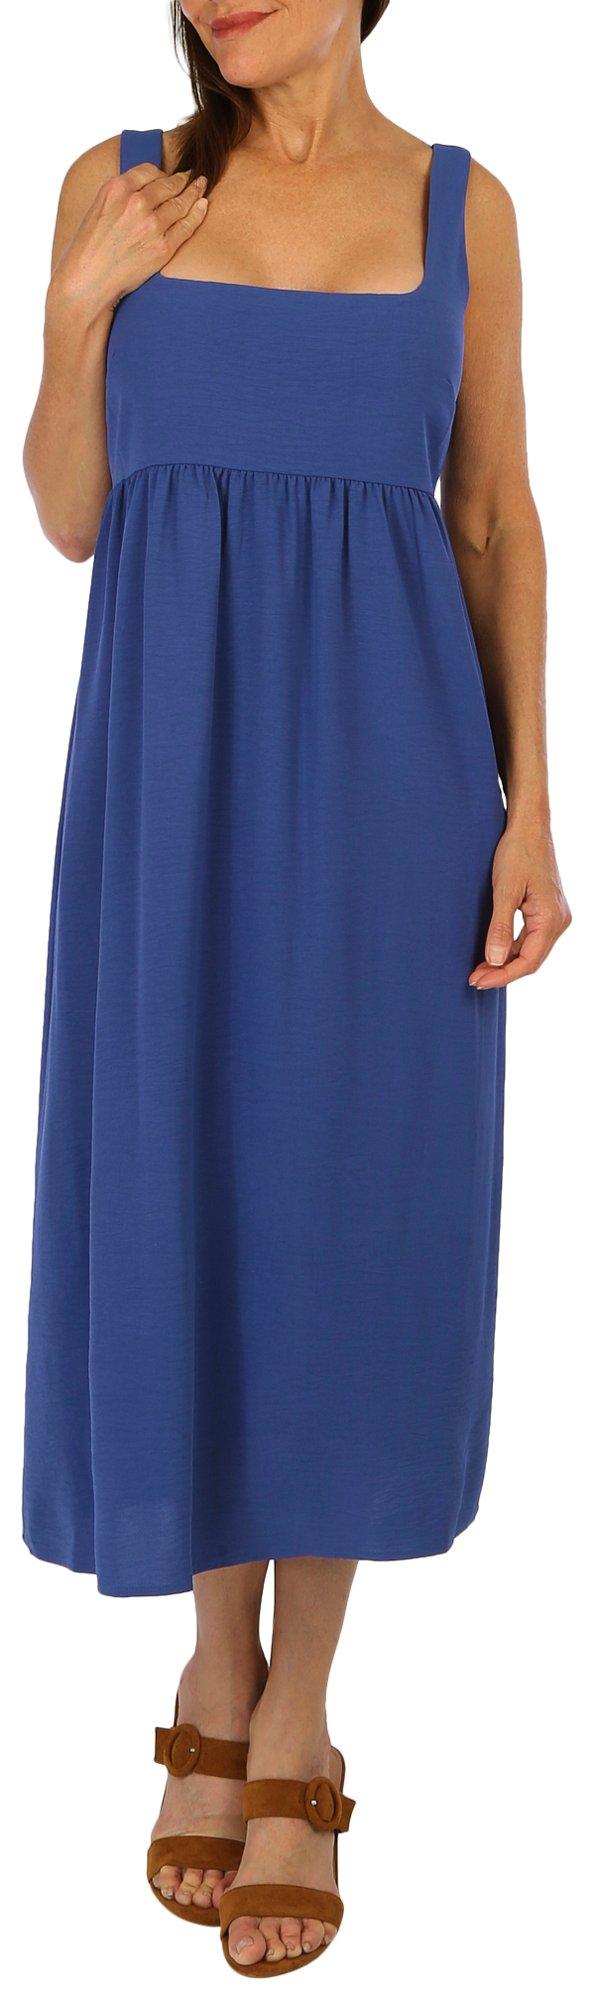 Connected Apparel Womens Solid Sleeveless Dress